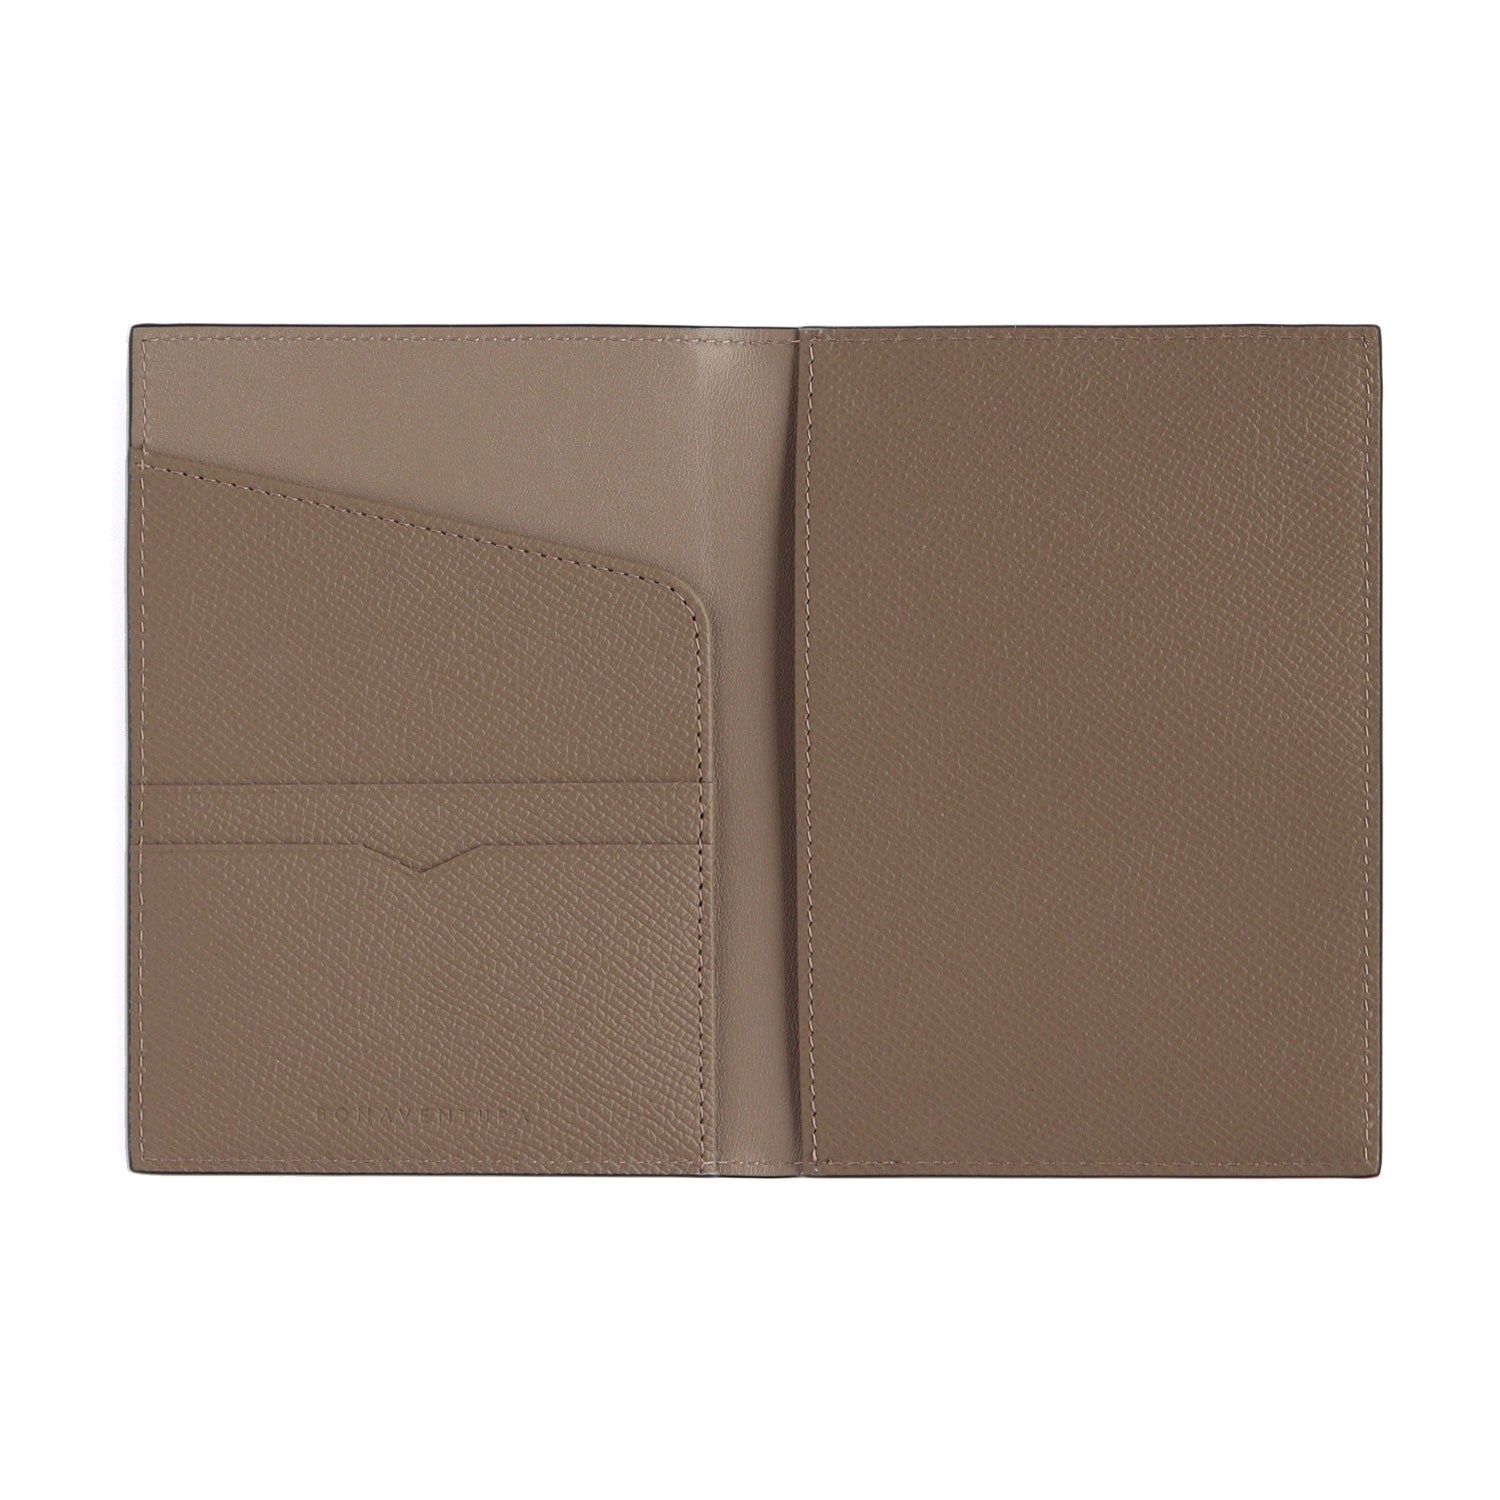 Passport case in Noblesse leather